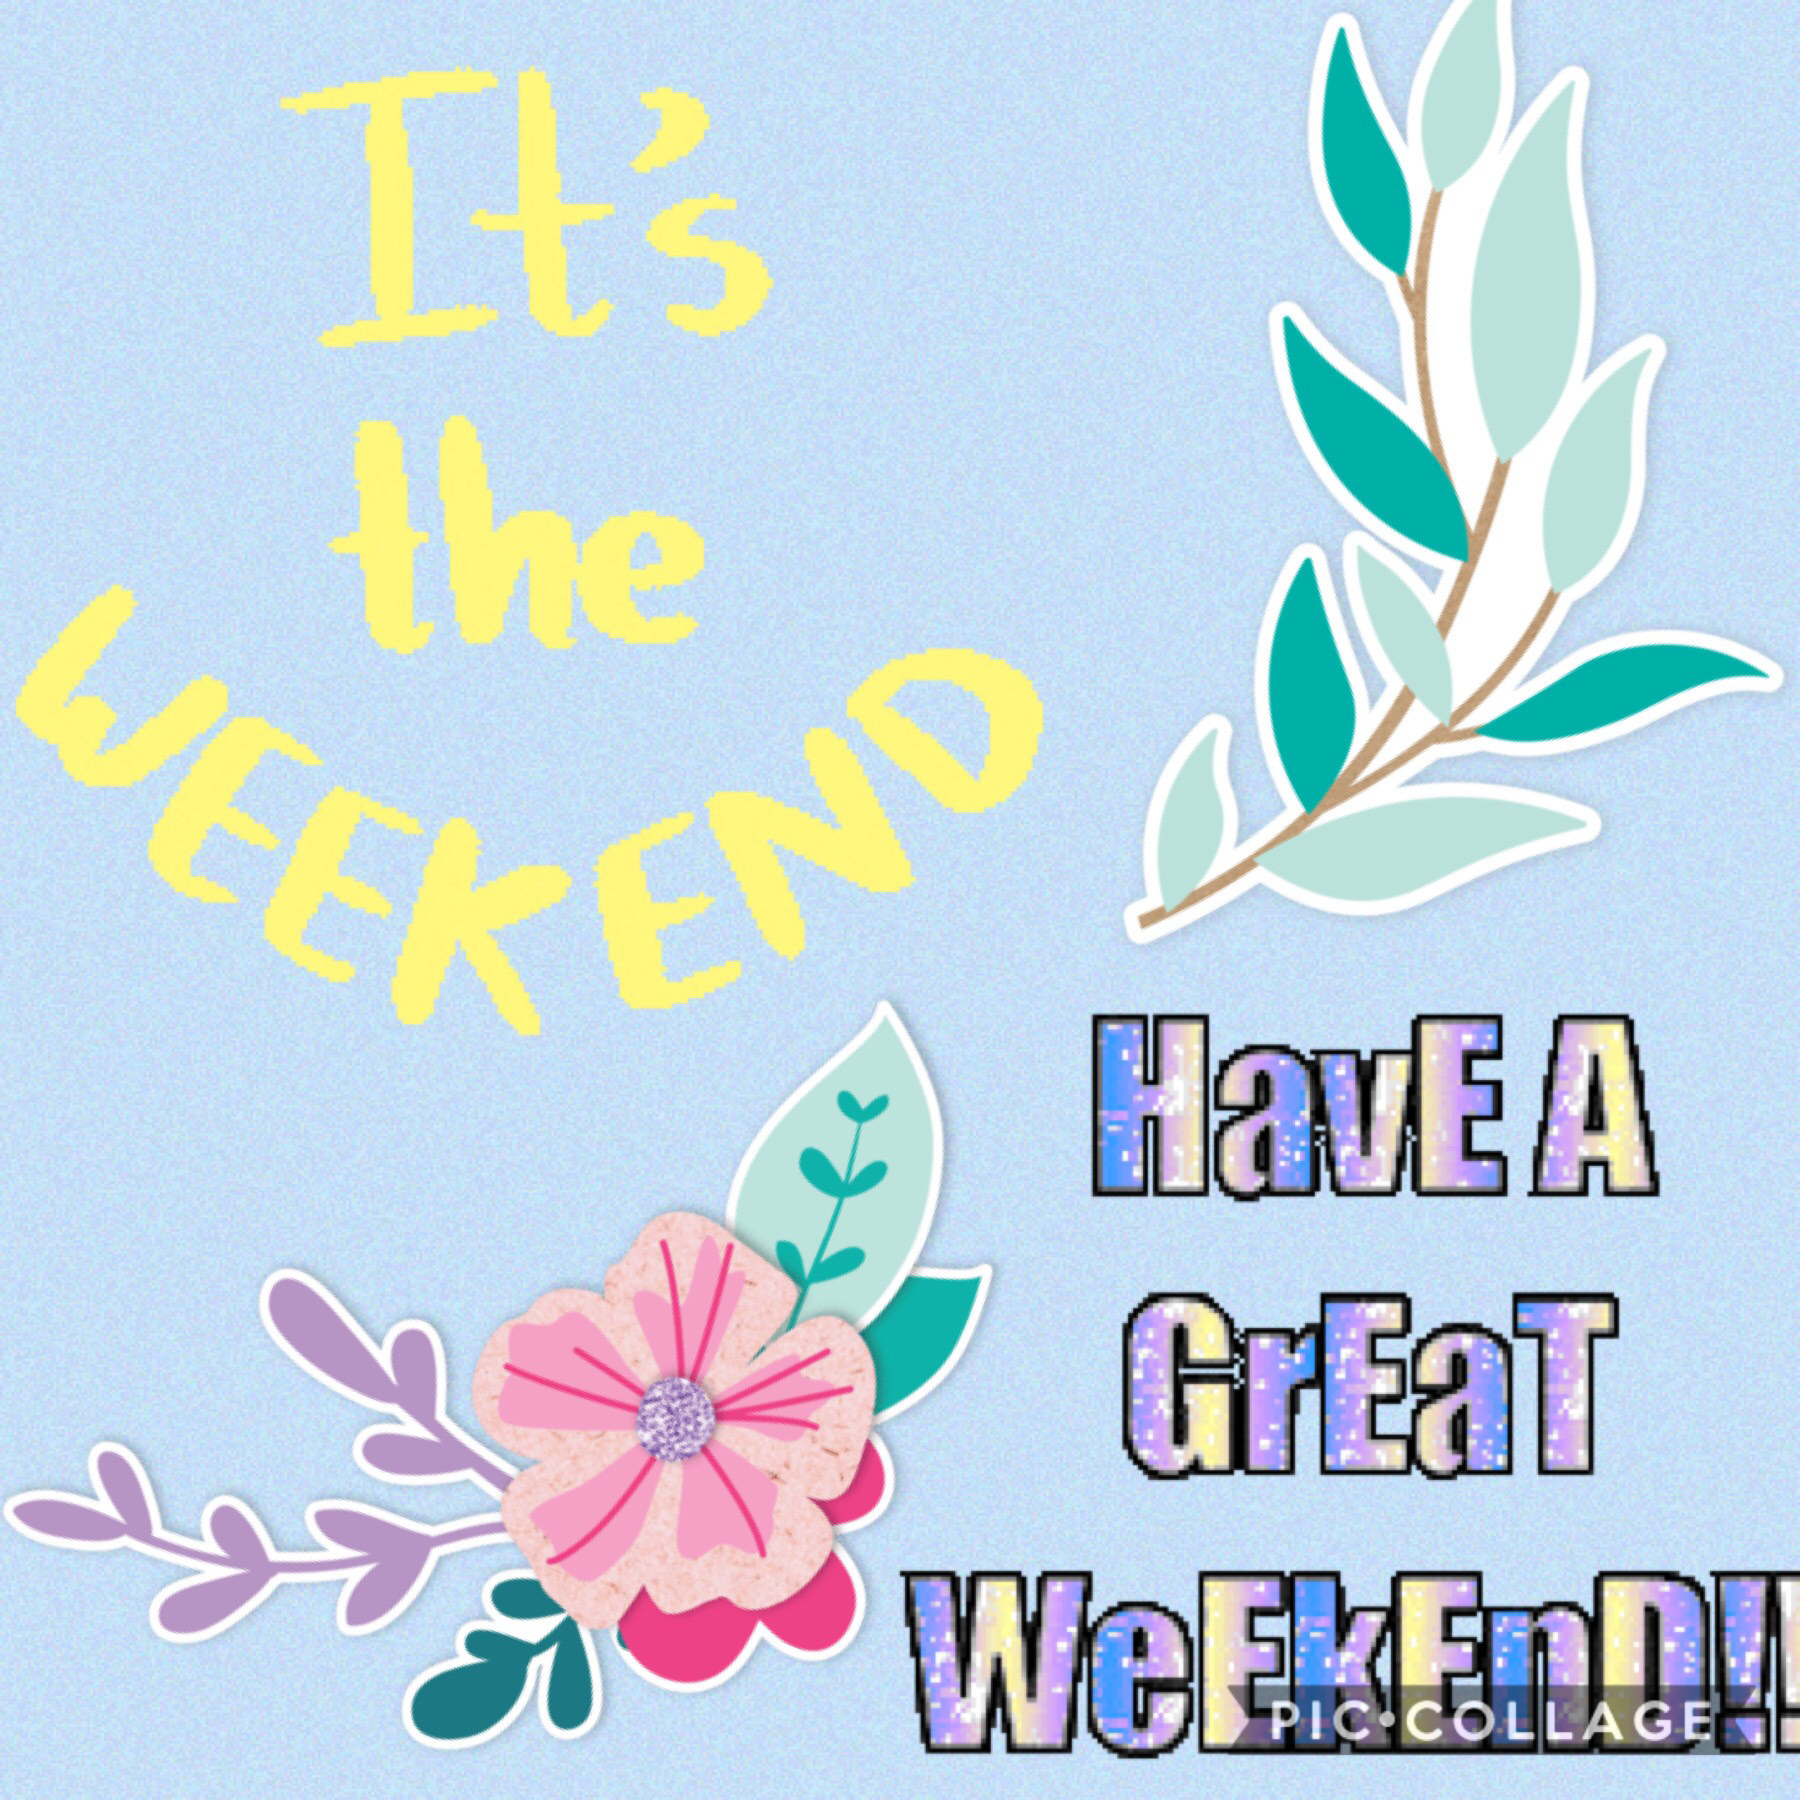 ITS THE WEEKEND!!!!!!!